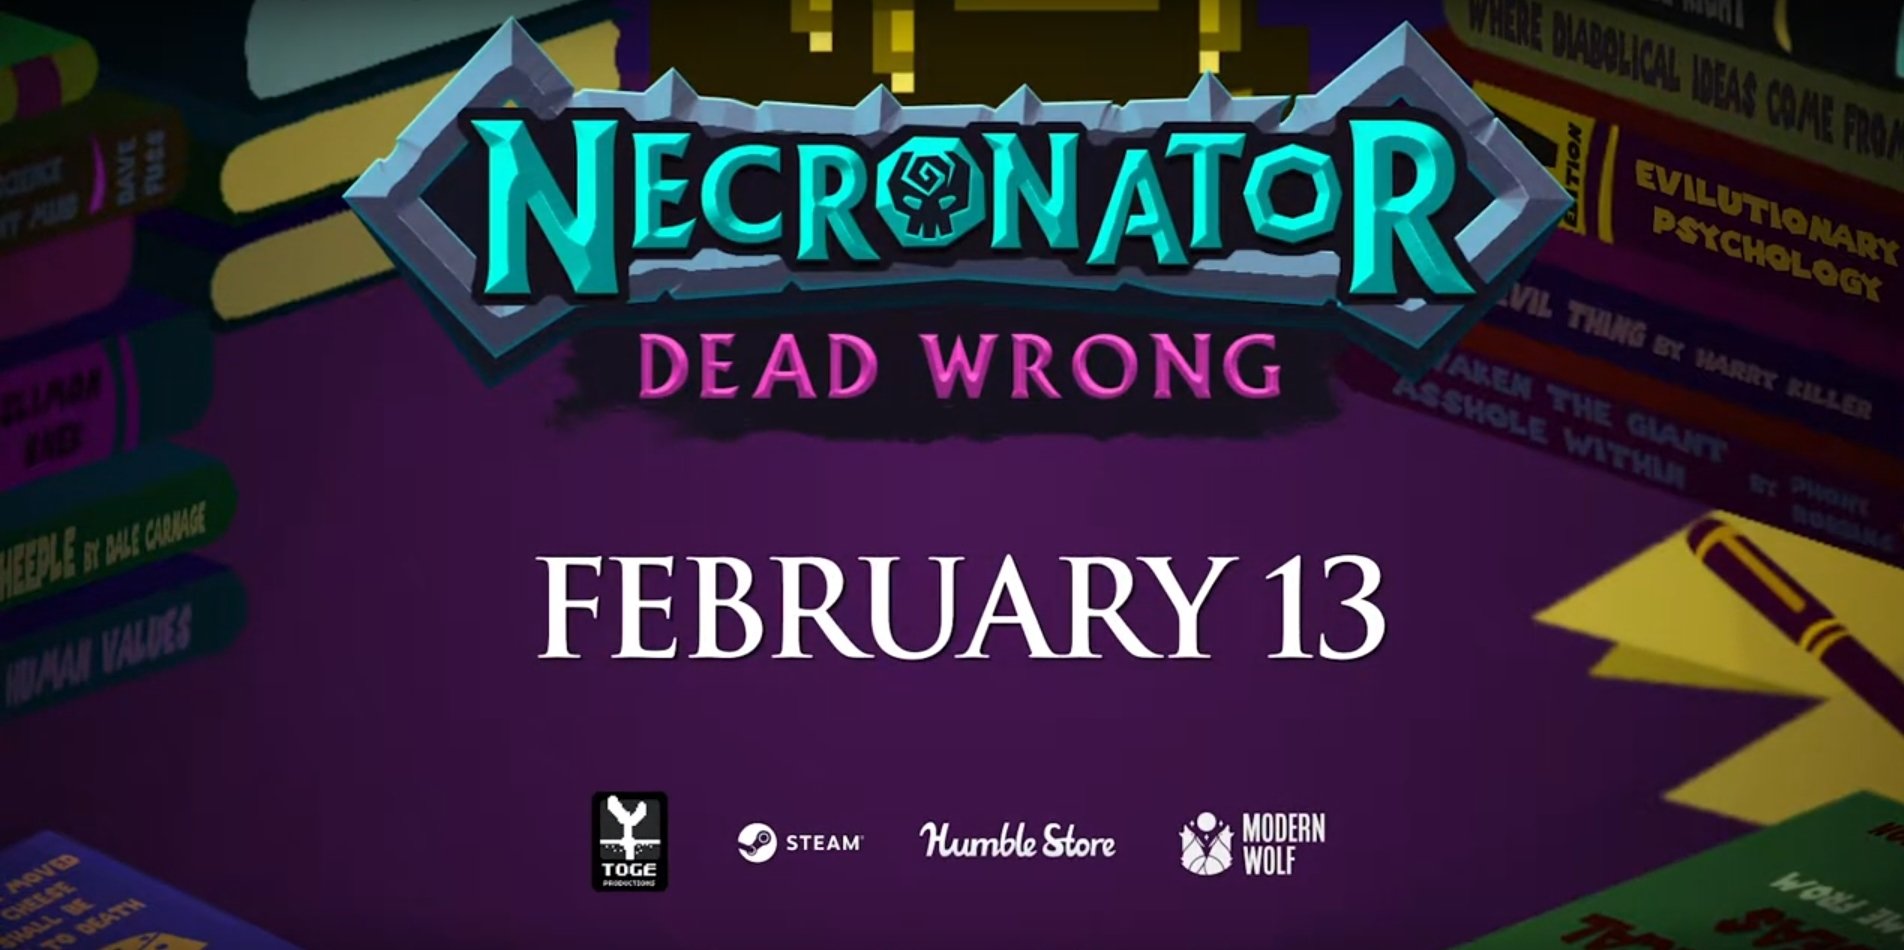 Toge Productions’ Necronator: Dead Wrong Set For February 13th Early Access Release